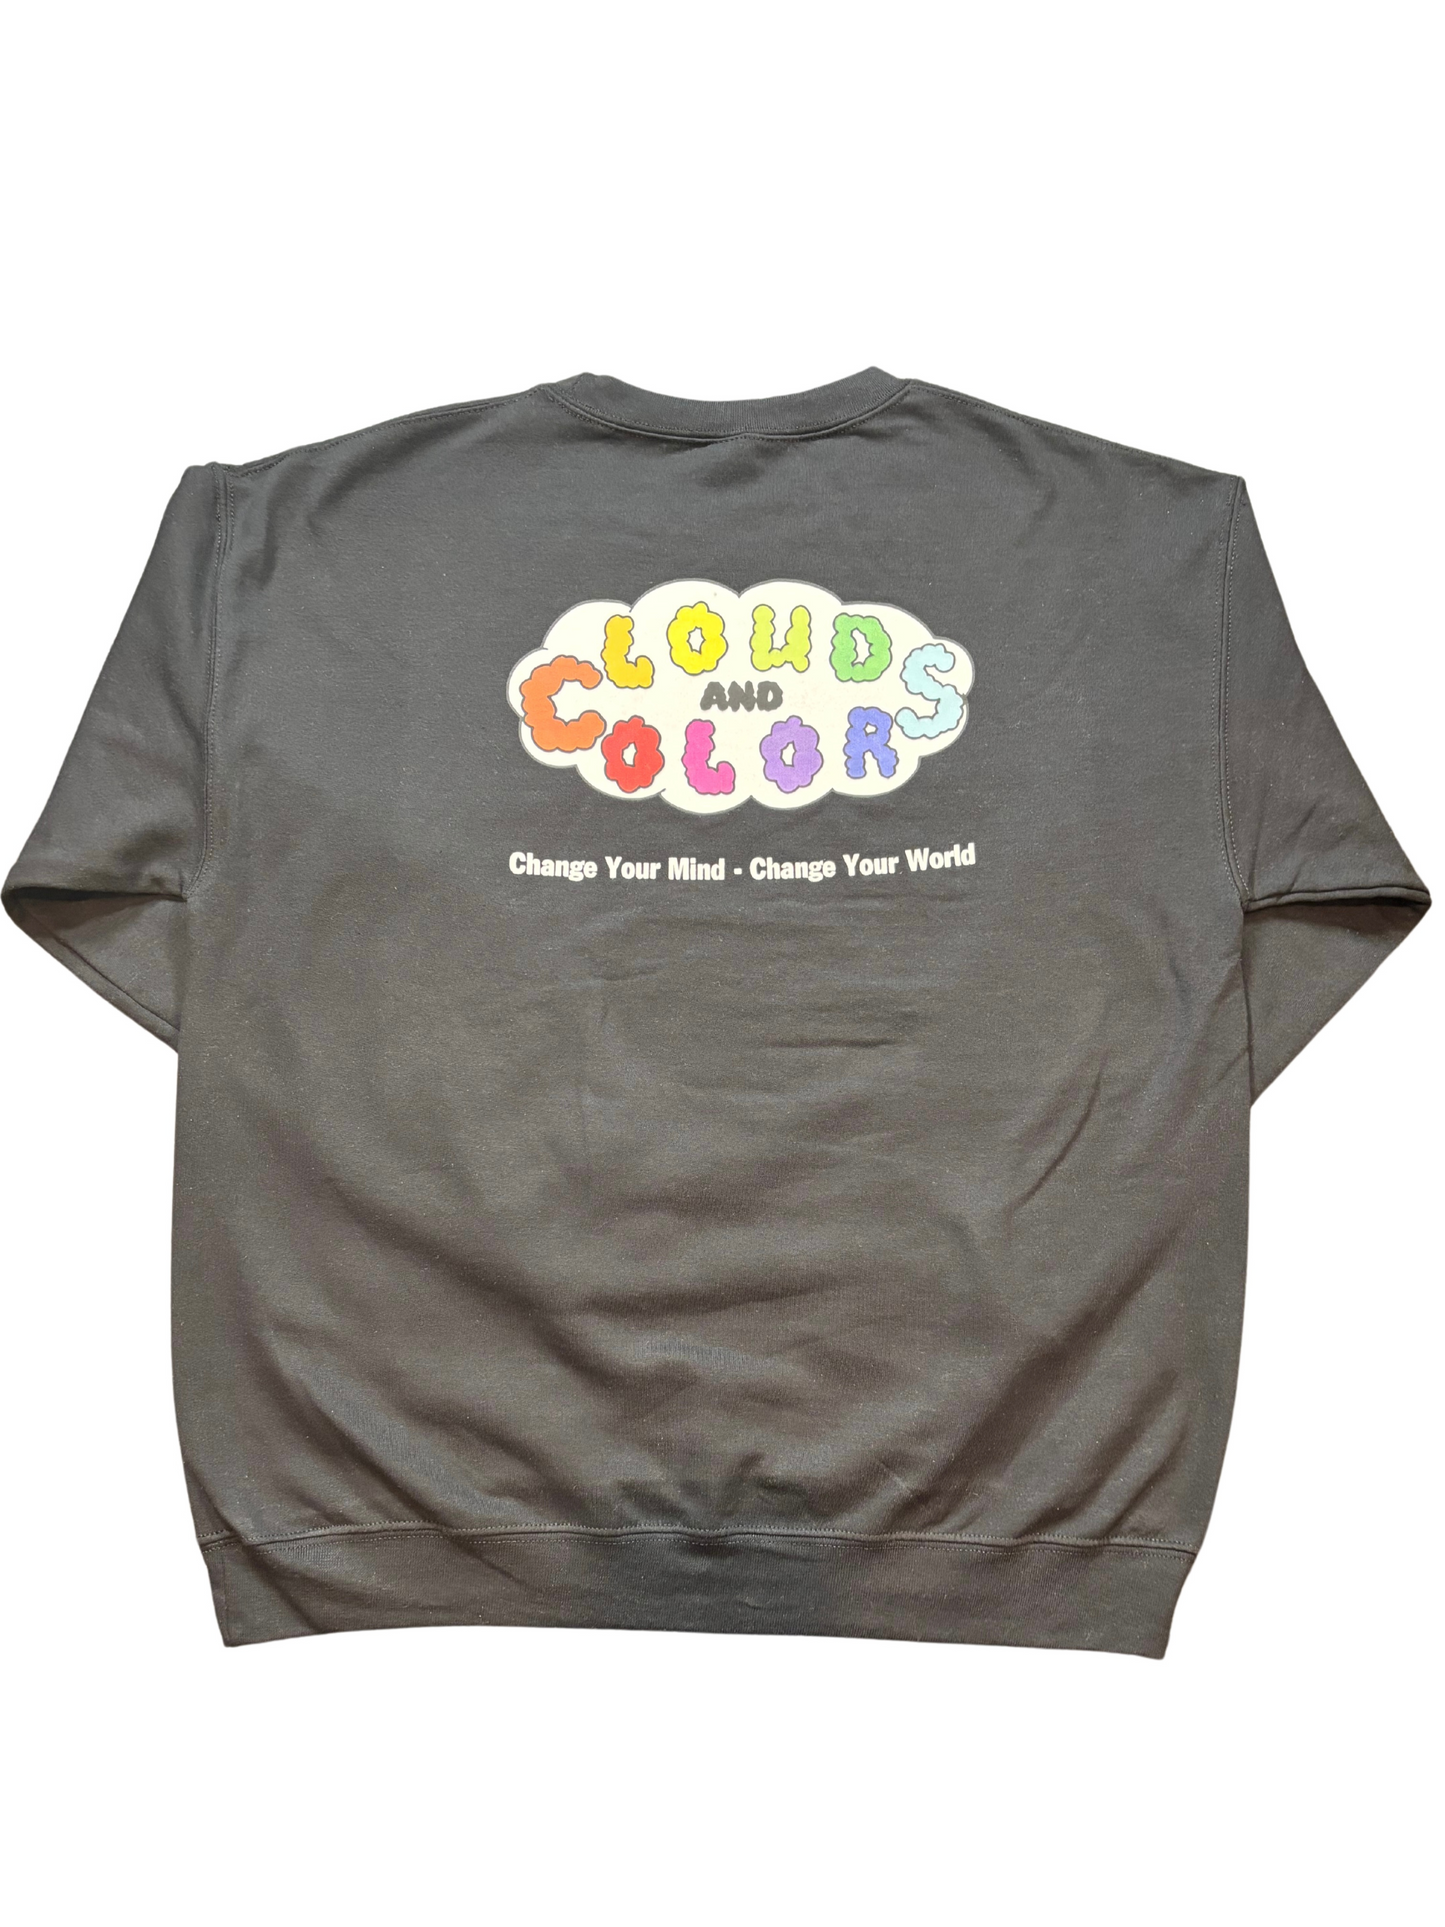 Clouds and Colors Crewneck - Black - Clouds and Colors Clothing